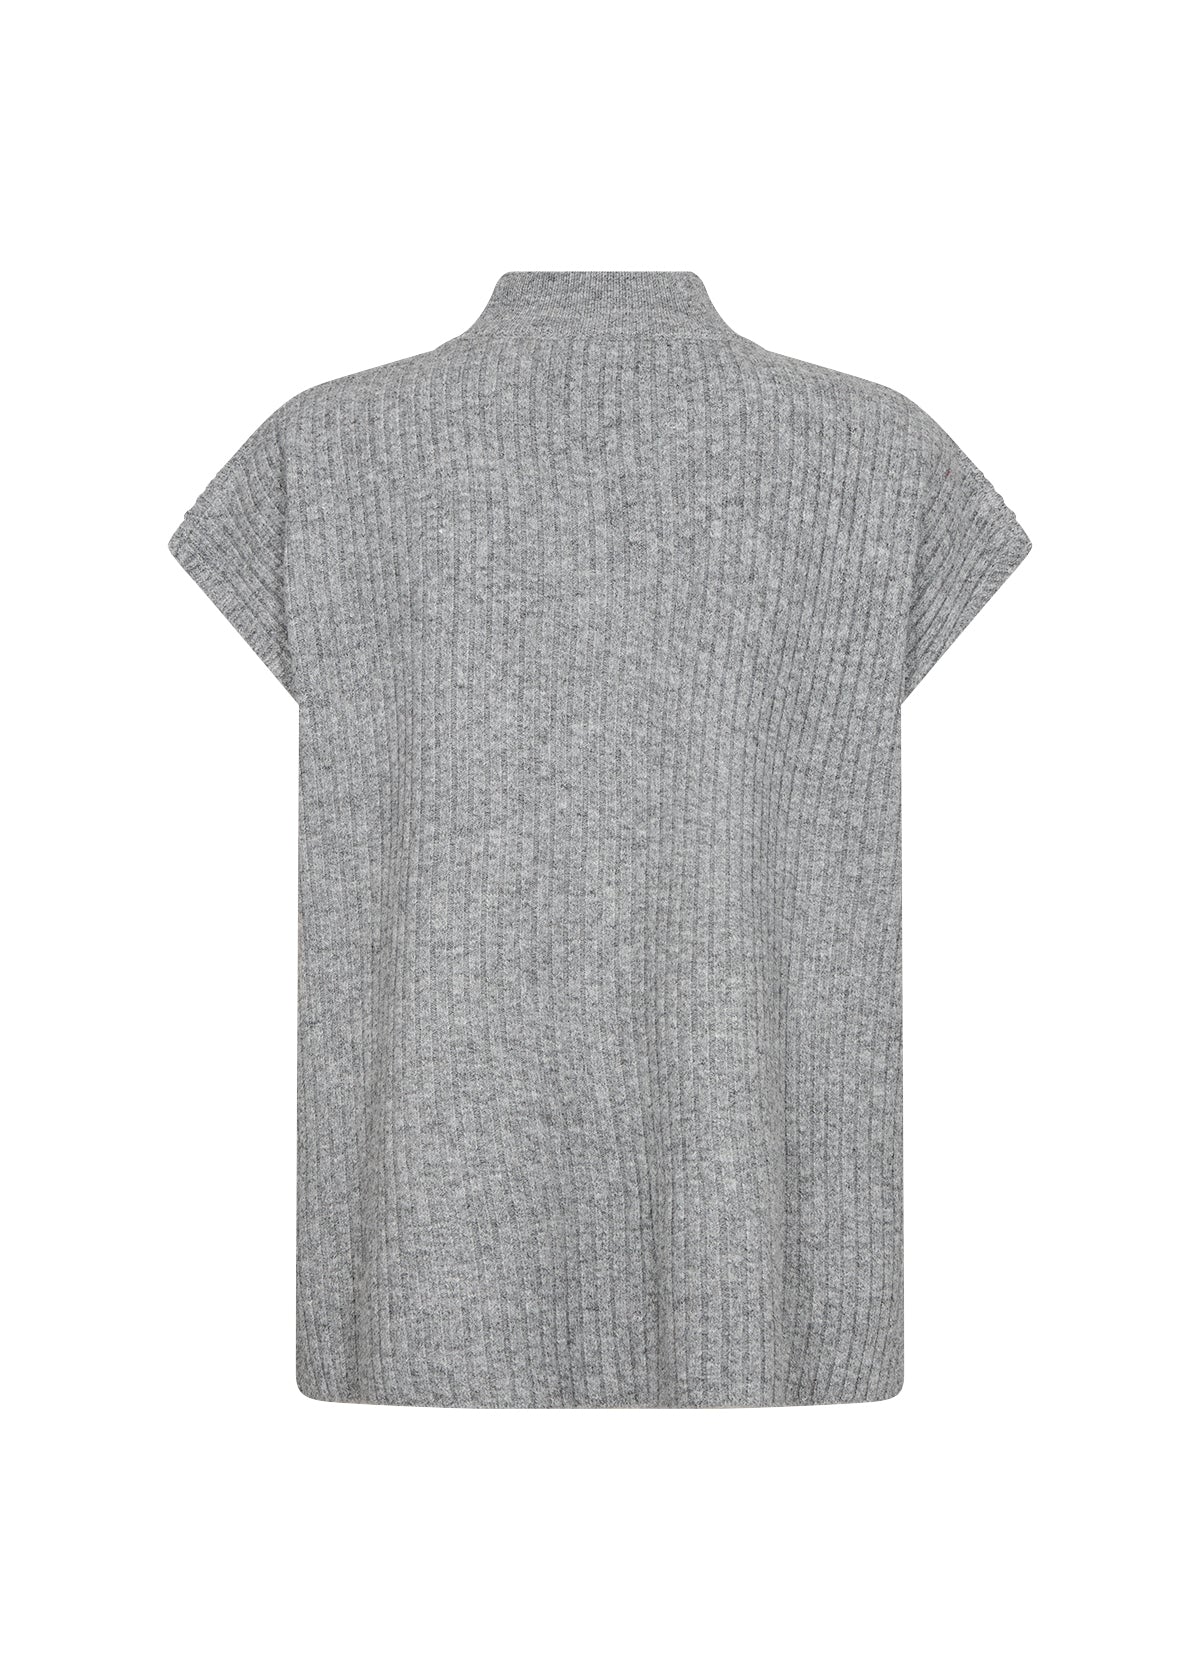 The Tamira Top from Soya Concept is a classic knitted top in a drop shoulder sleeveless style made for the warm autumn days. It has a high neckline, a rib knitted design, a loose fit and slits on both sides to give you all day comfort and style. Style this over a basic long sleeve shirt and a skirt for a look that you can take from the office to a night out.